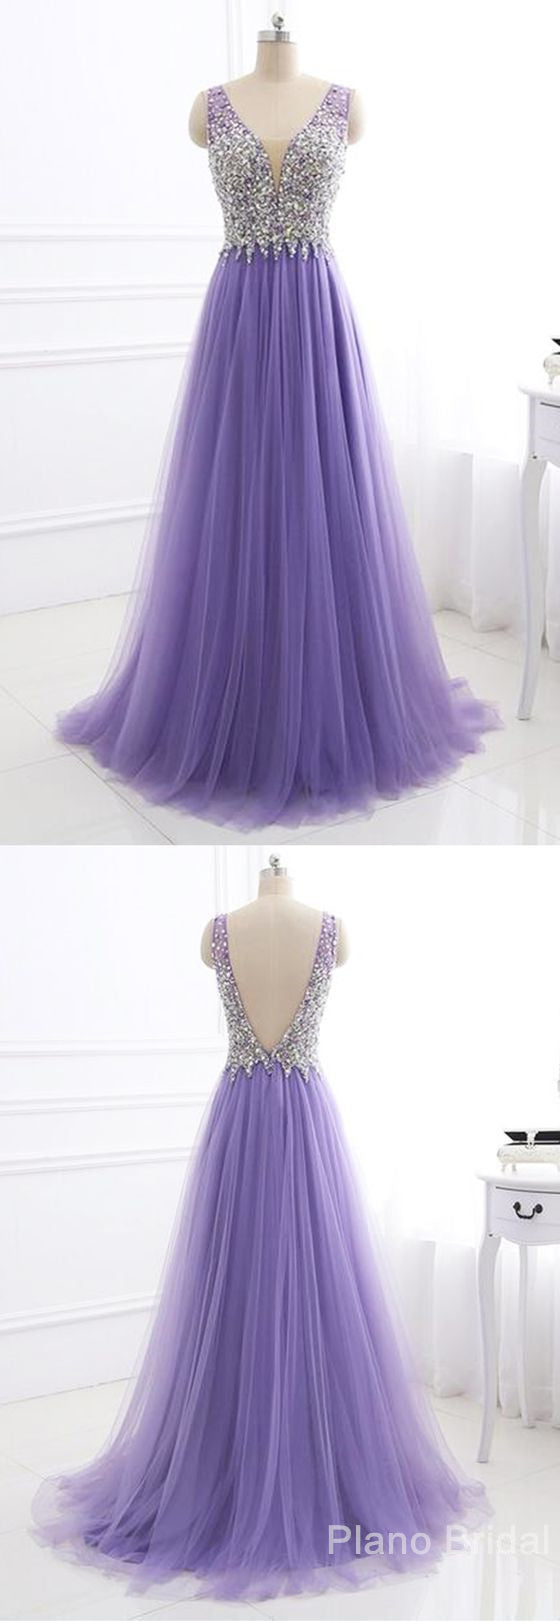 Purple Tulle V Neck Silver Beaded Long Evening Dress, Purple Halter Corset Prom Dress outfits, Prom Dress Blue Lace